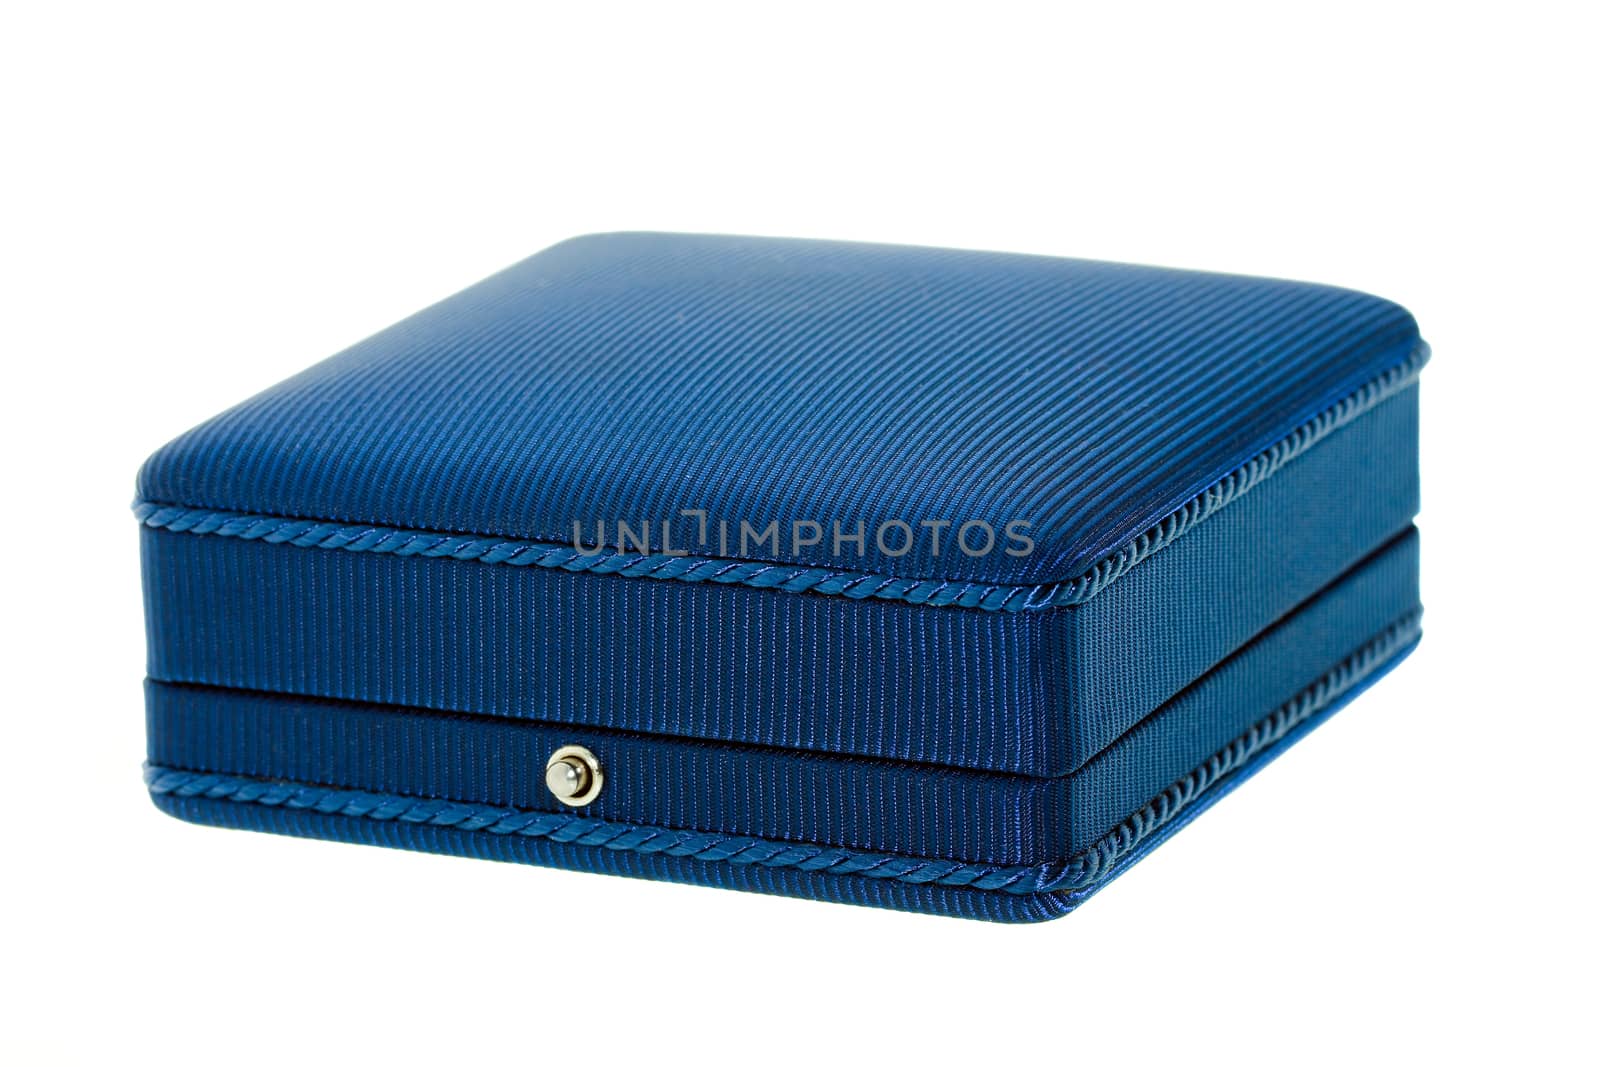 the blue box isolated on a white background